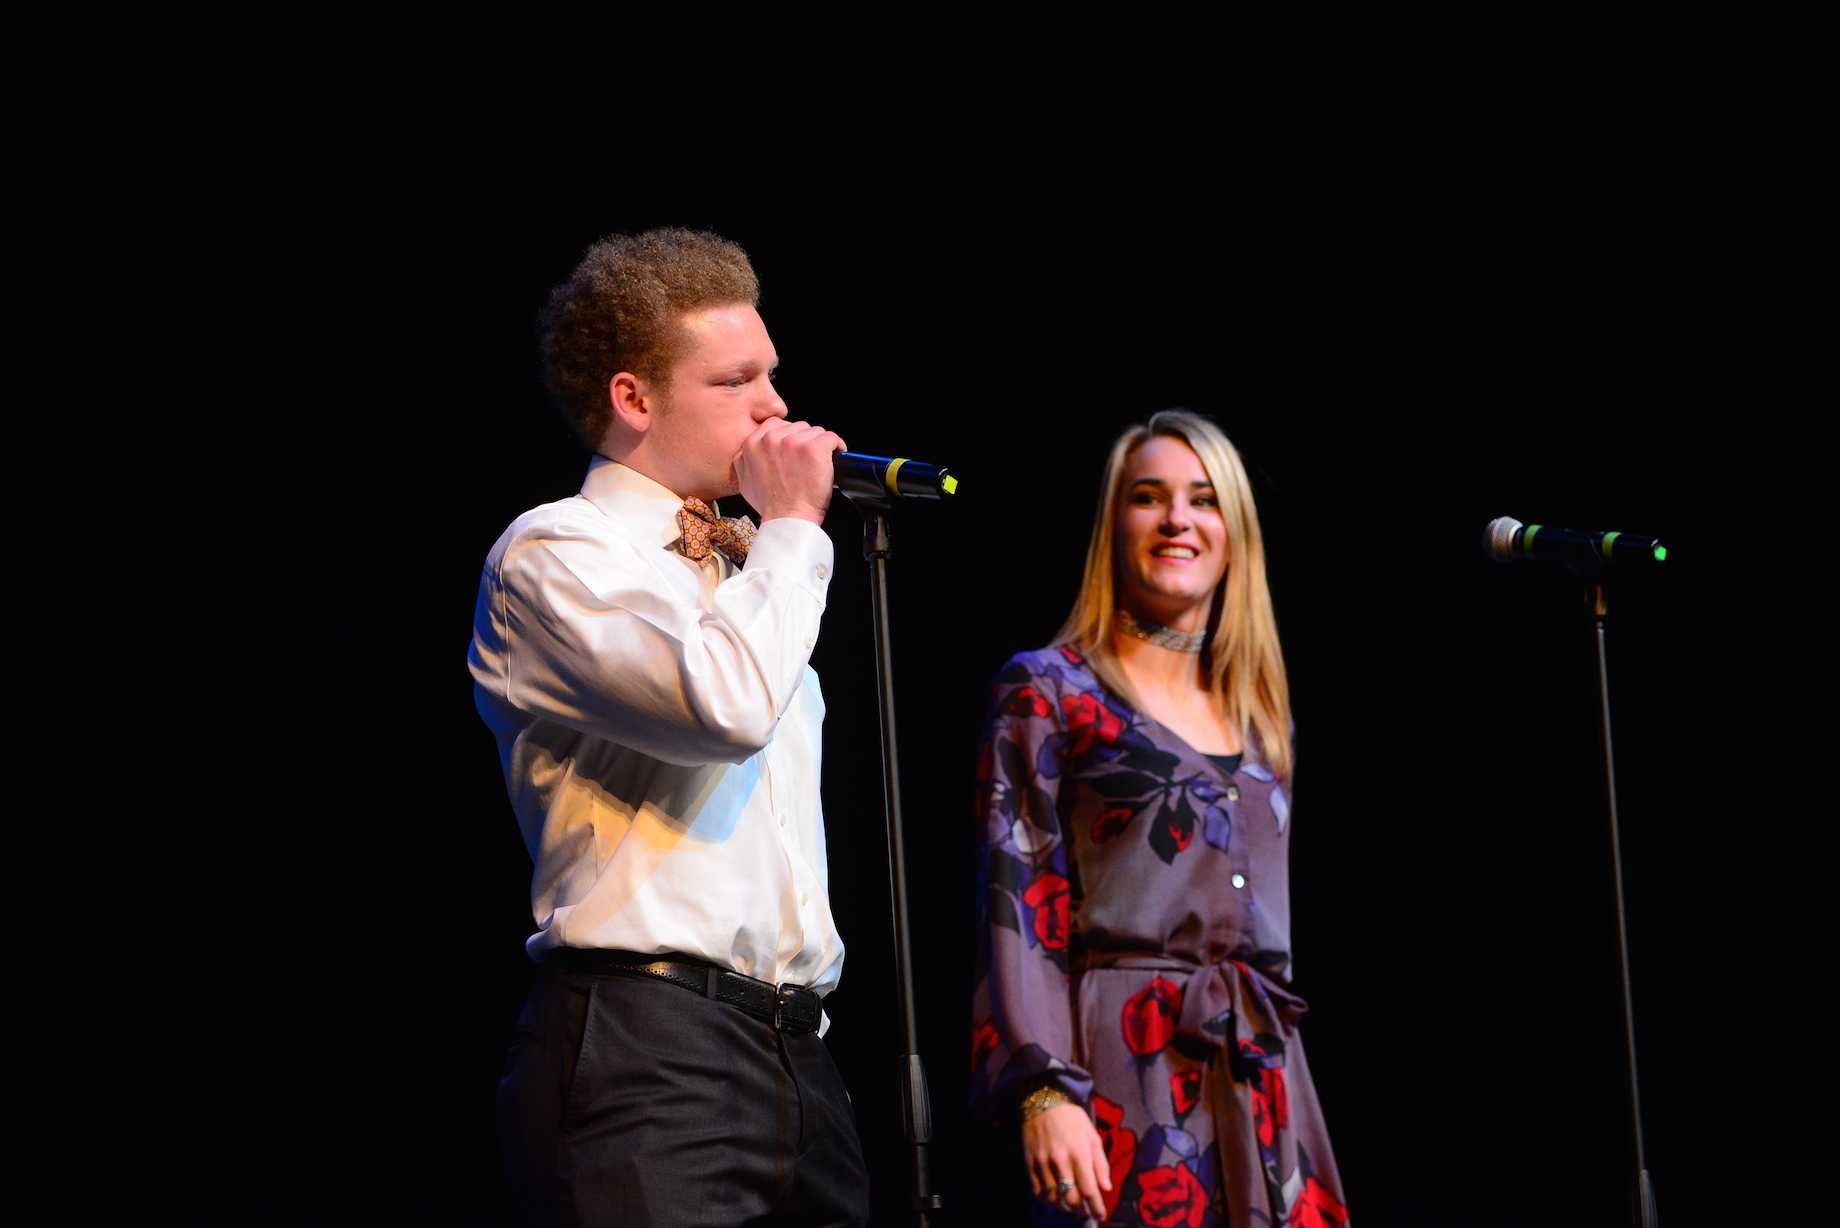 (photo courtesy of Mr. Hubert Worley) Cooper Henry and Riley Kellum sing "Brighter Days"